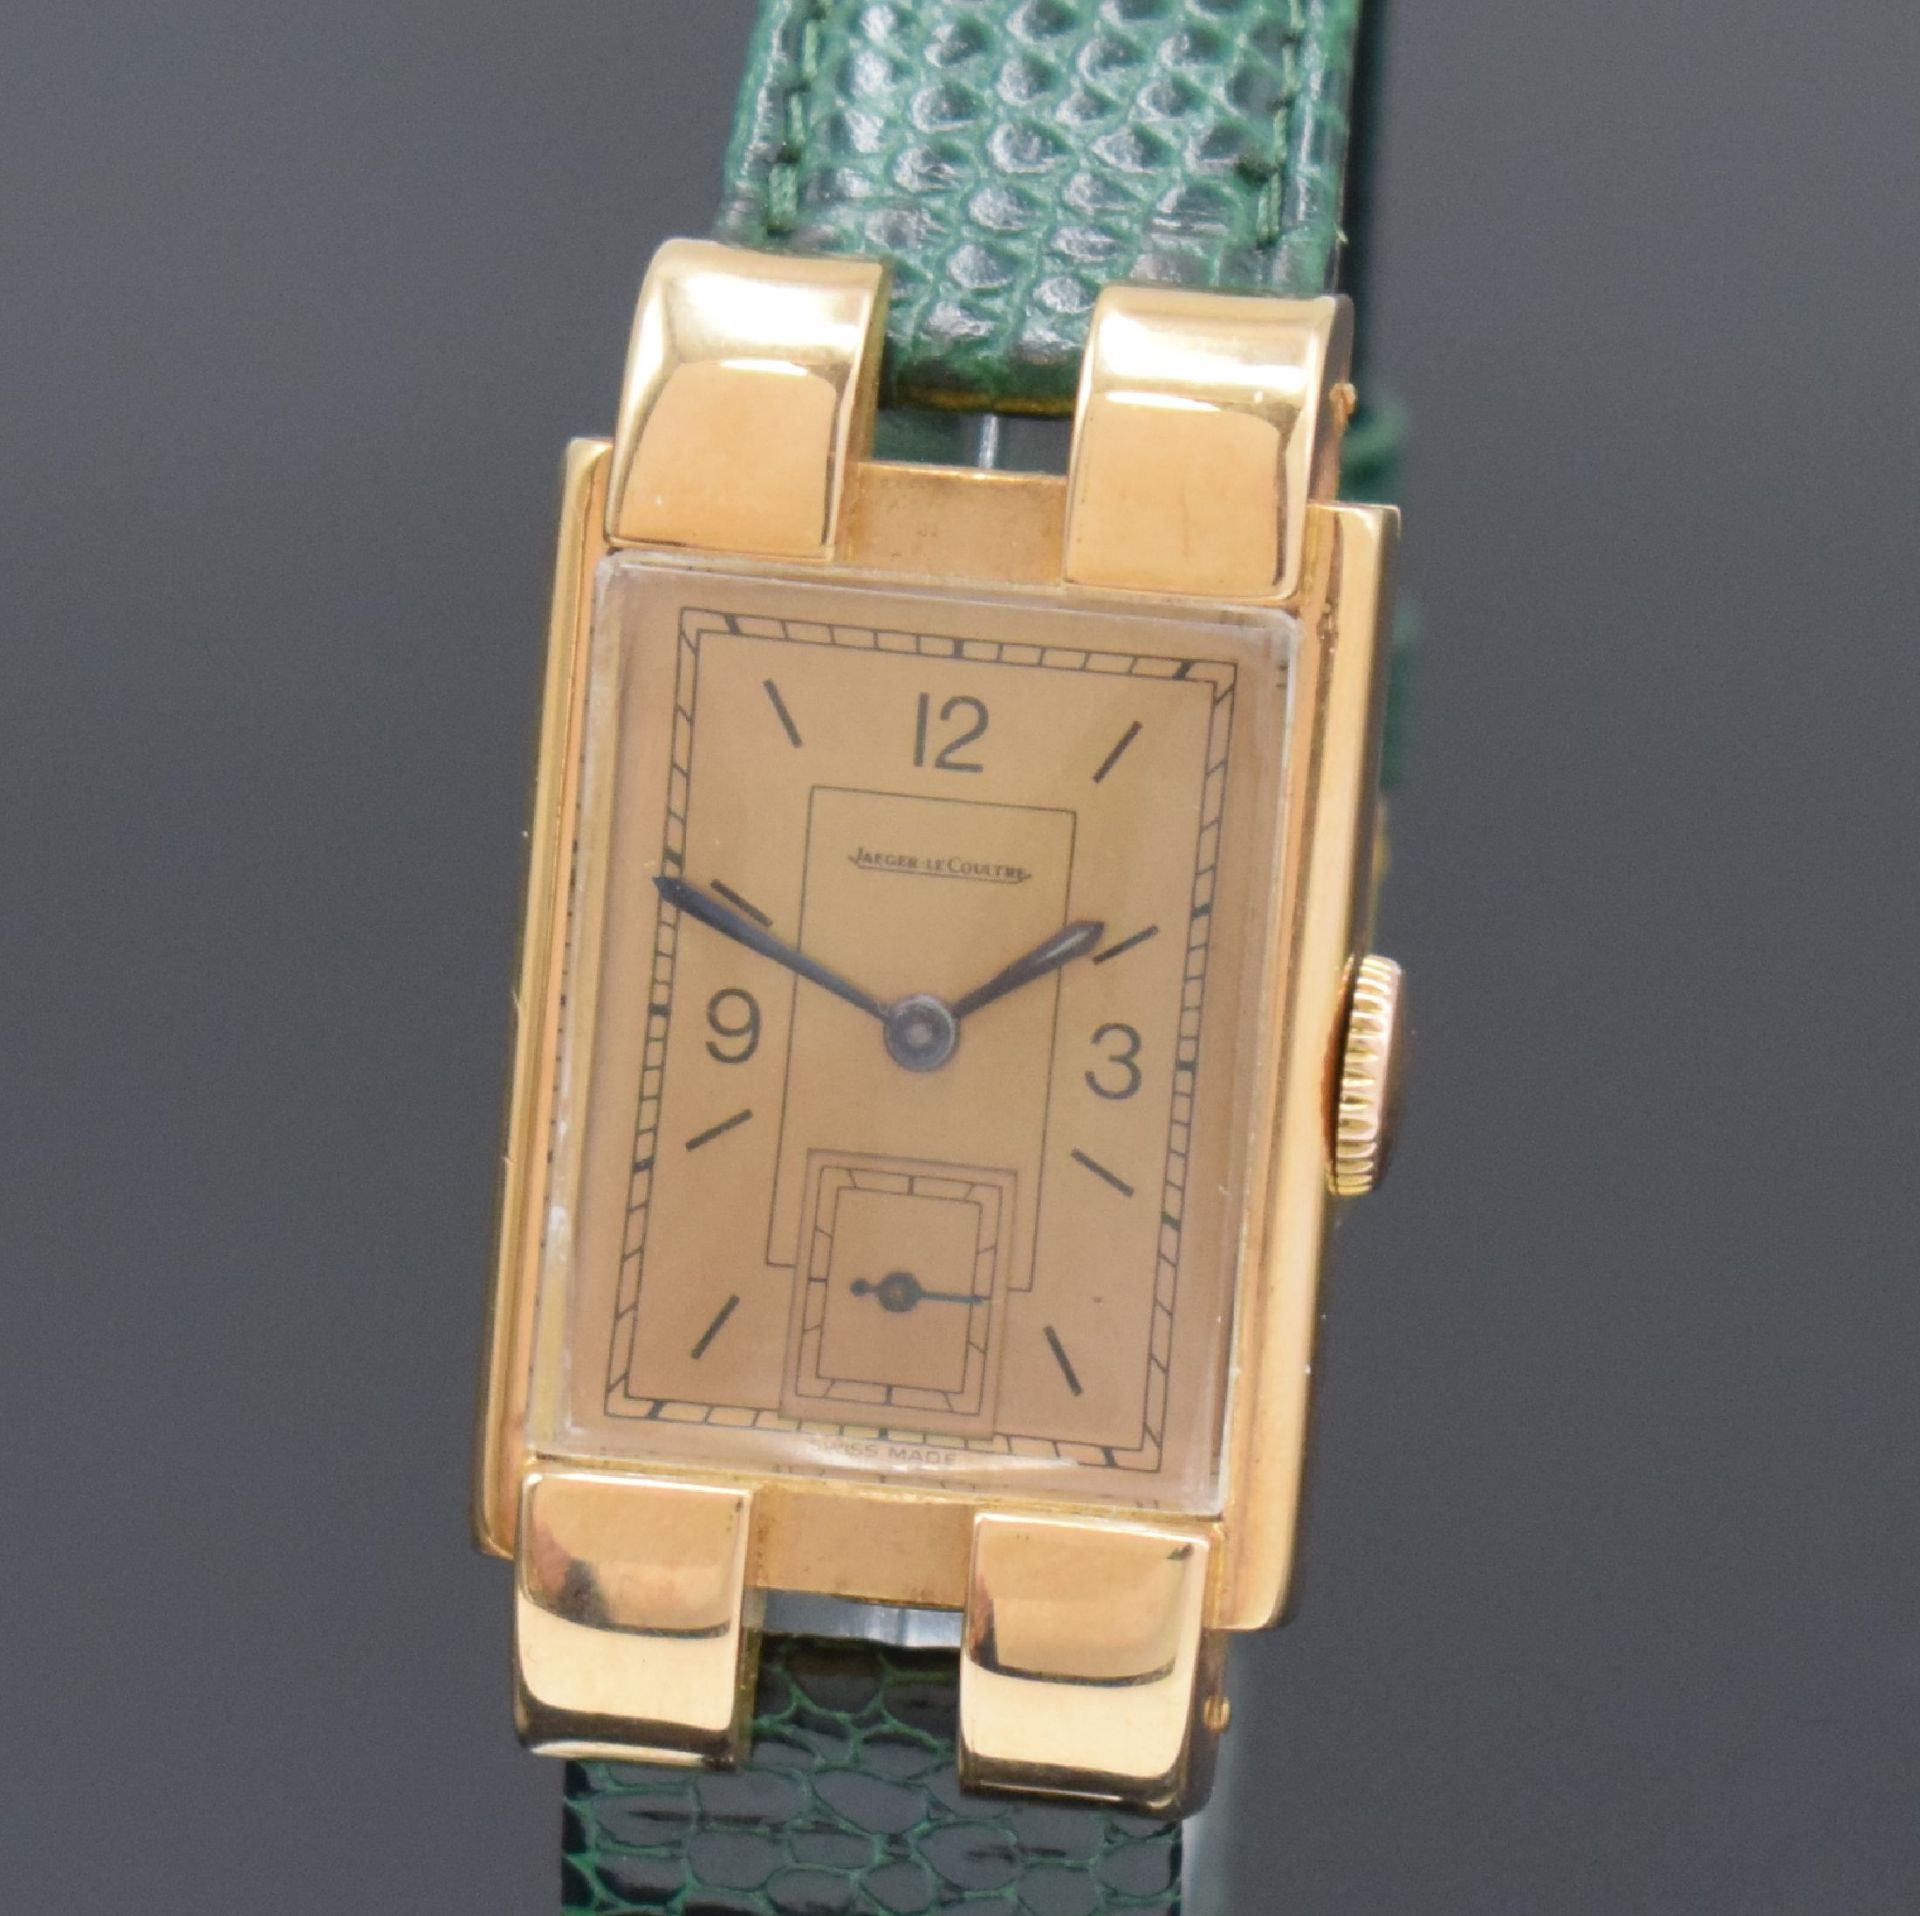 Jaeger-LeCoultre rechteckige Armbanduhr in Rotgold - Image 2 of 5